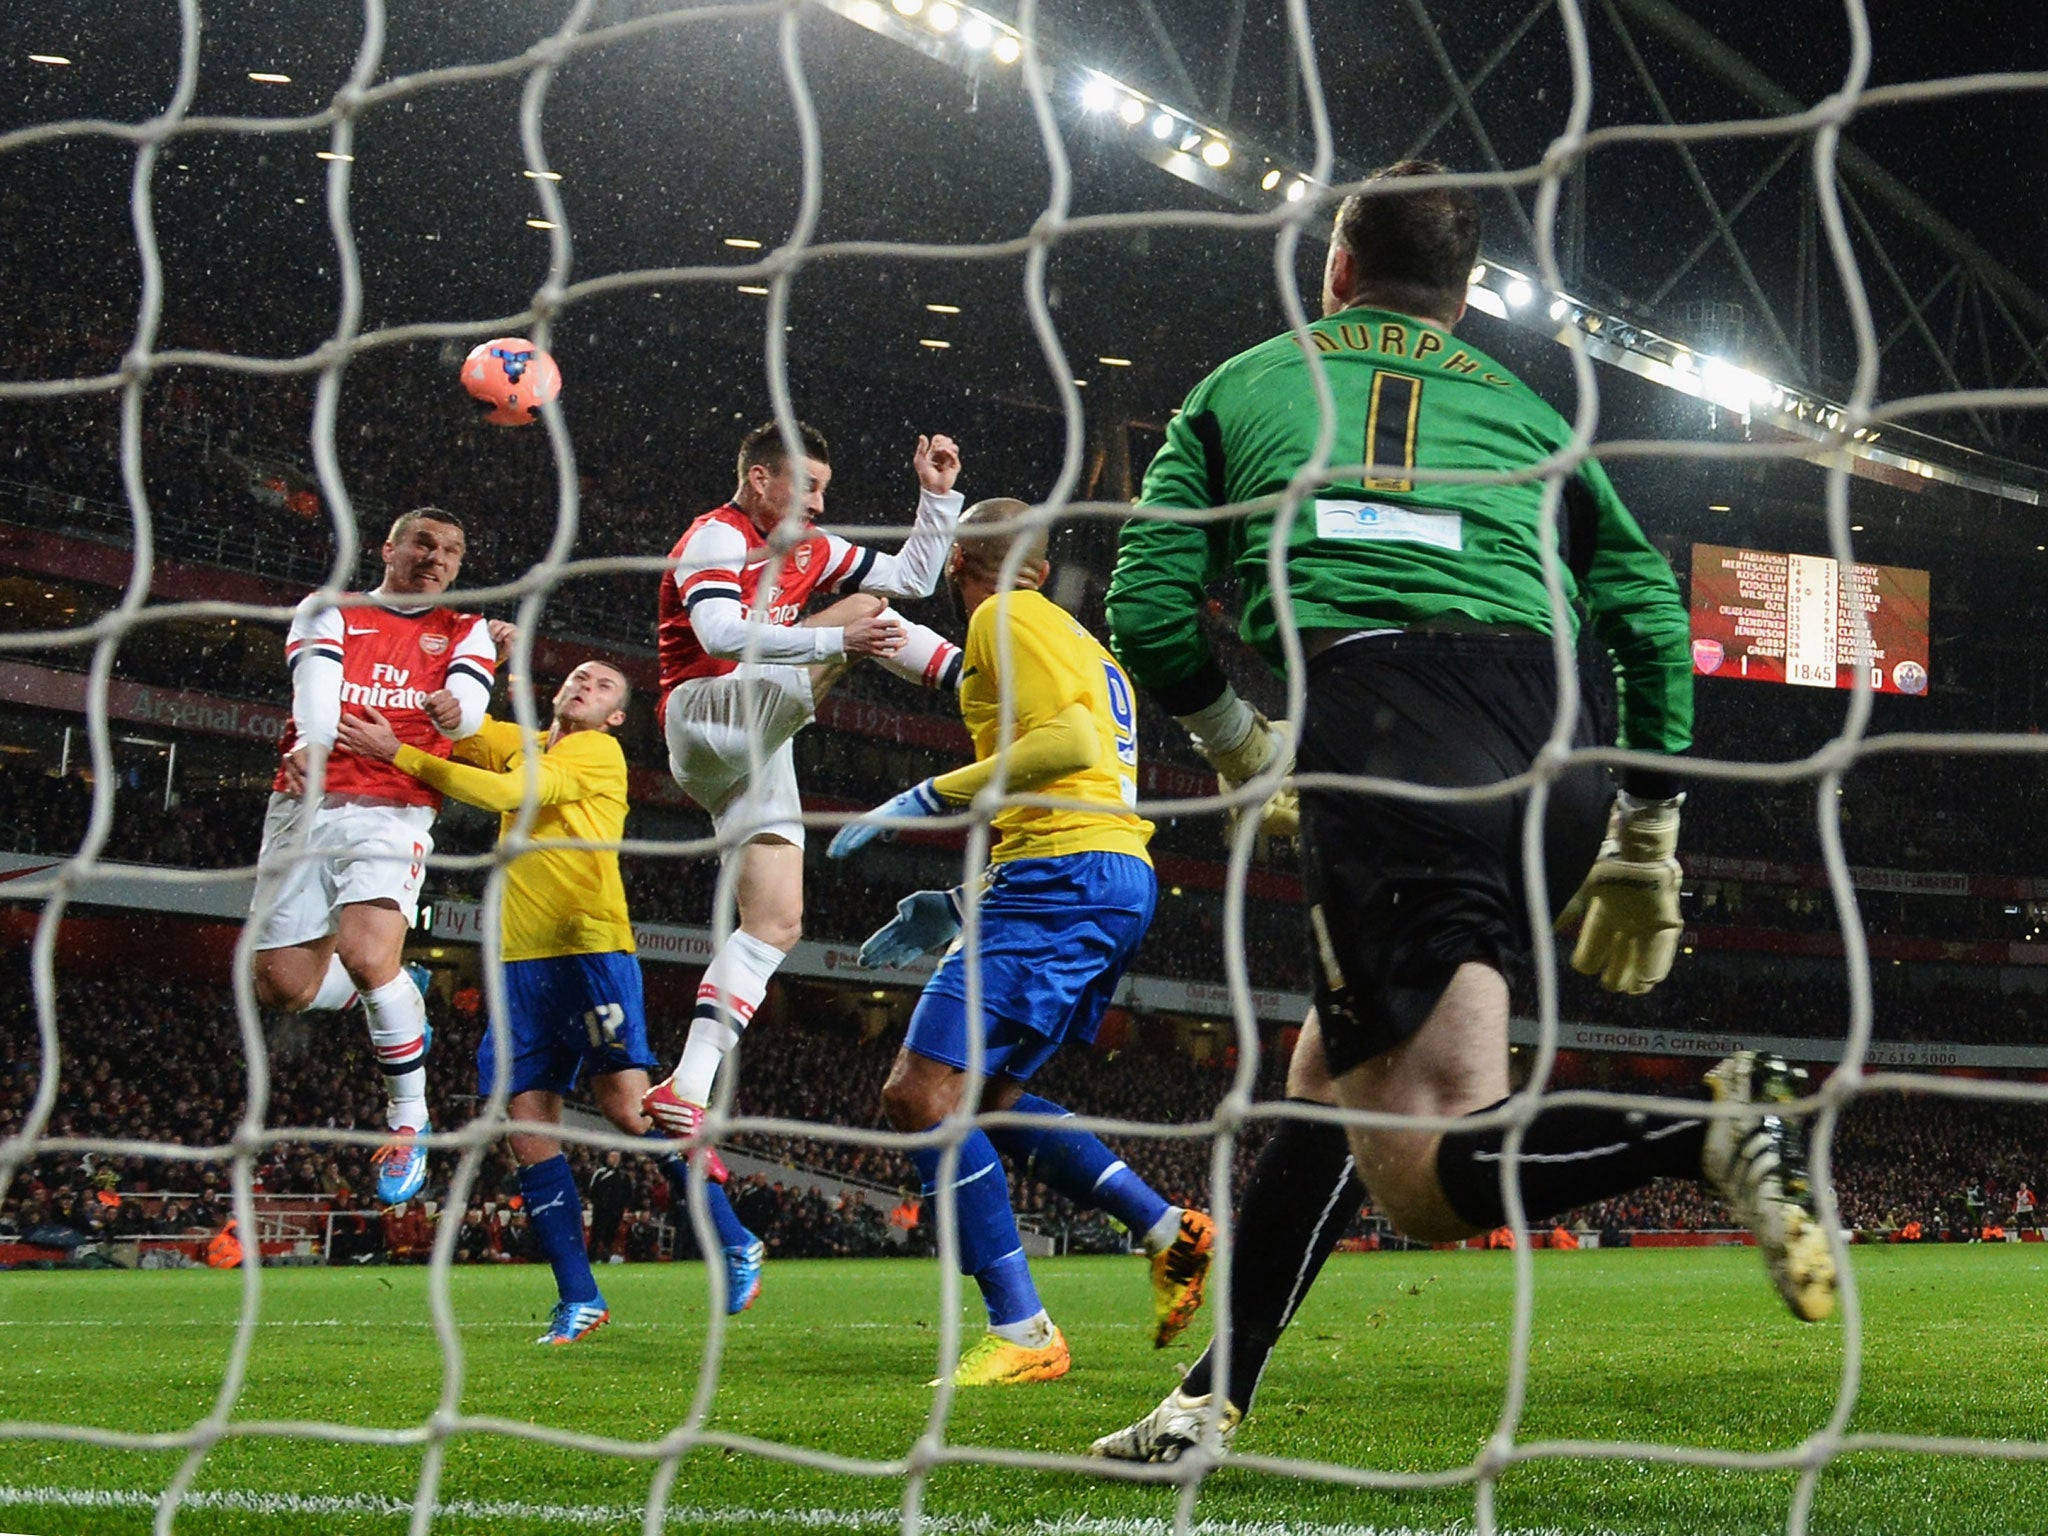 Lukas Podolski scored twice for Arsenal against Coventry in the fourth round